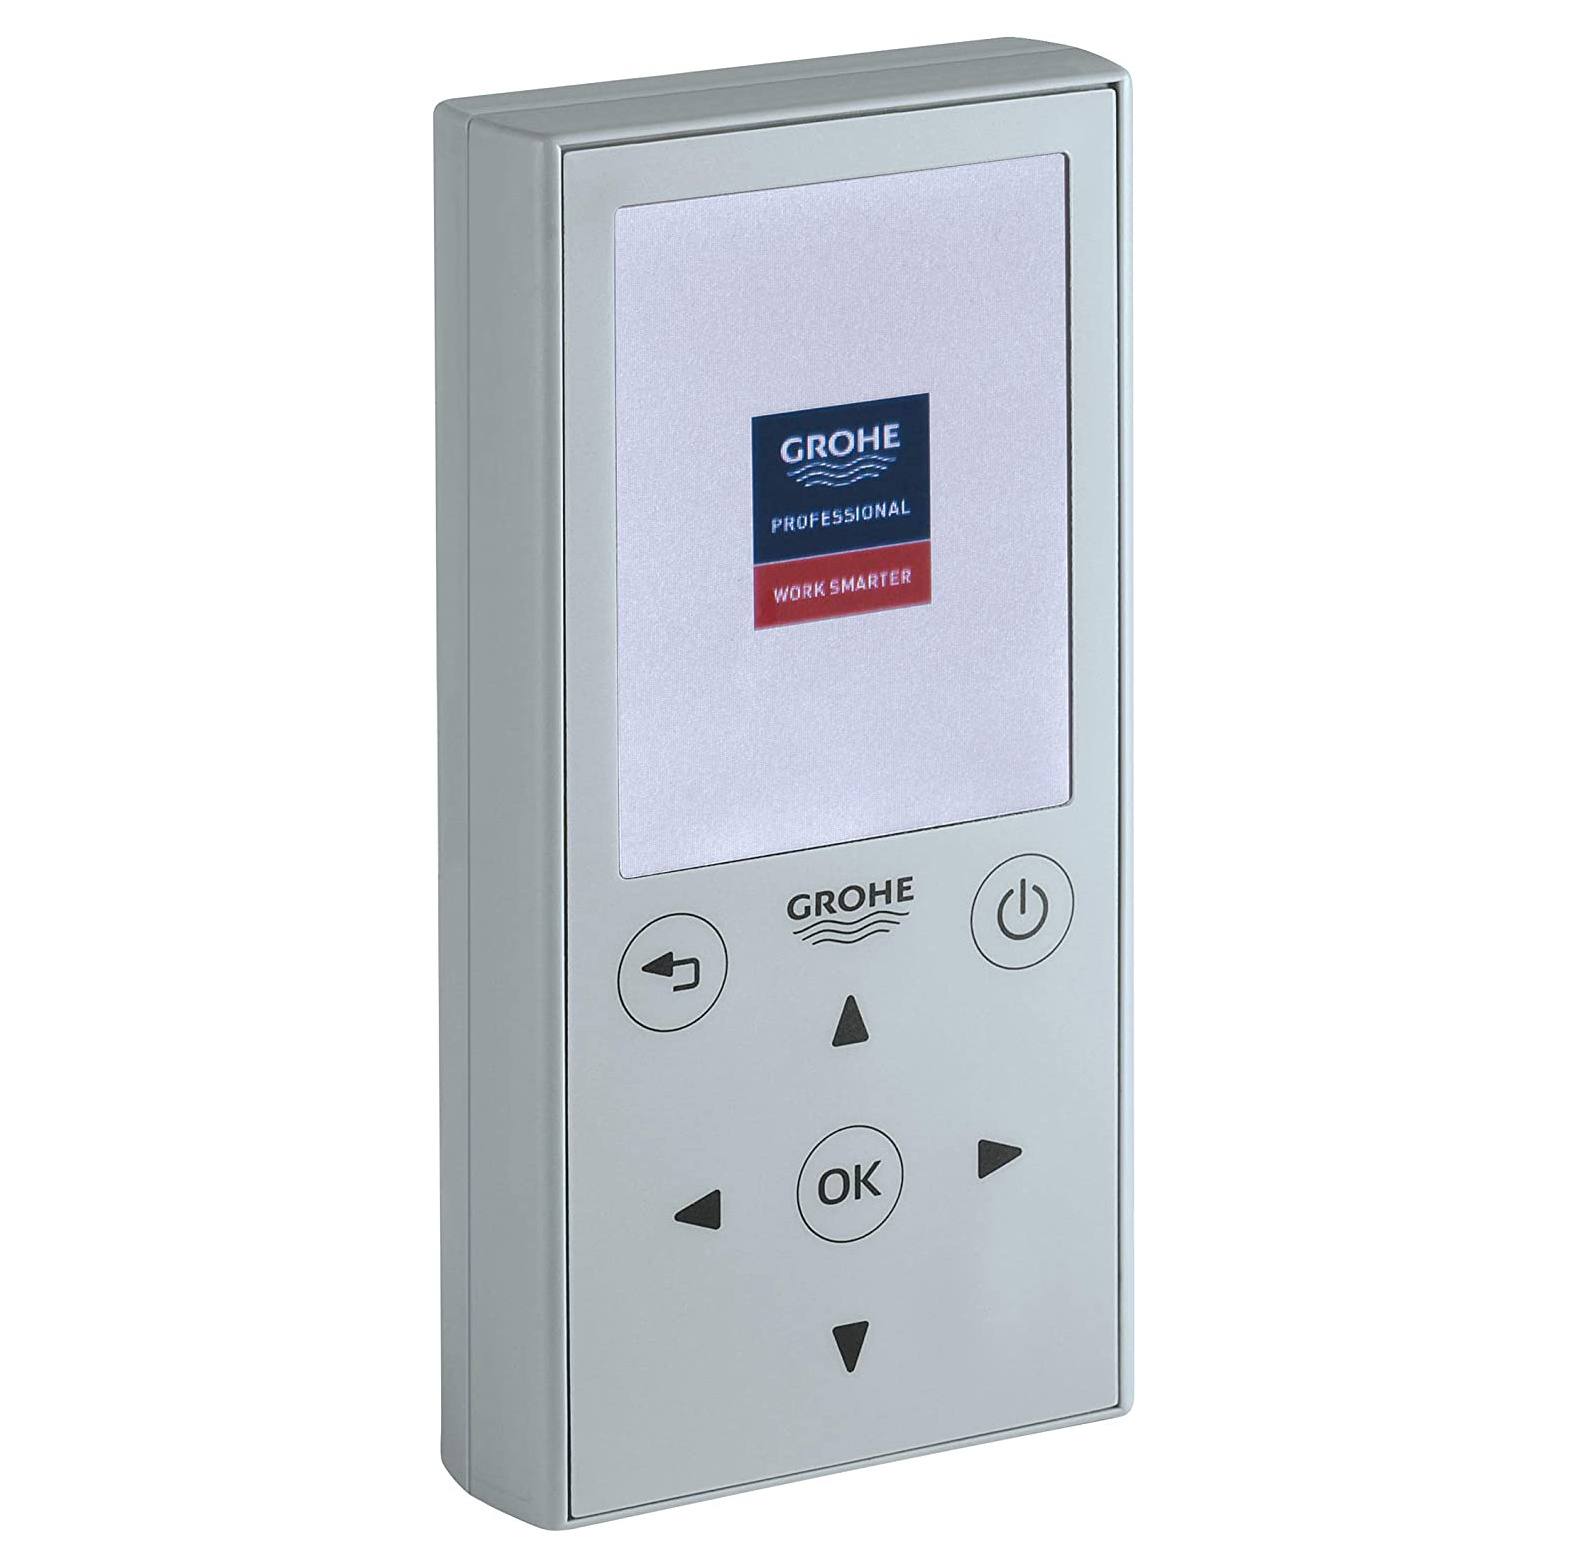 Remote Control for Commercial Touchless Electronic Lav Fcts